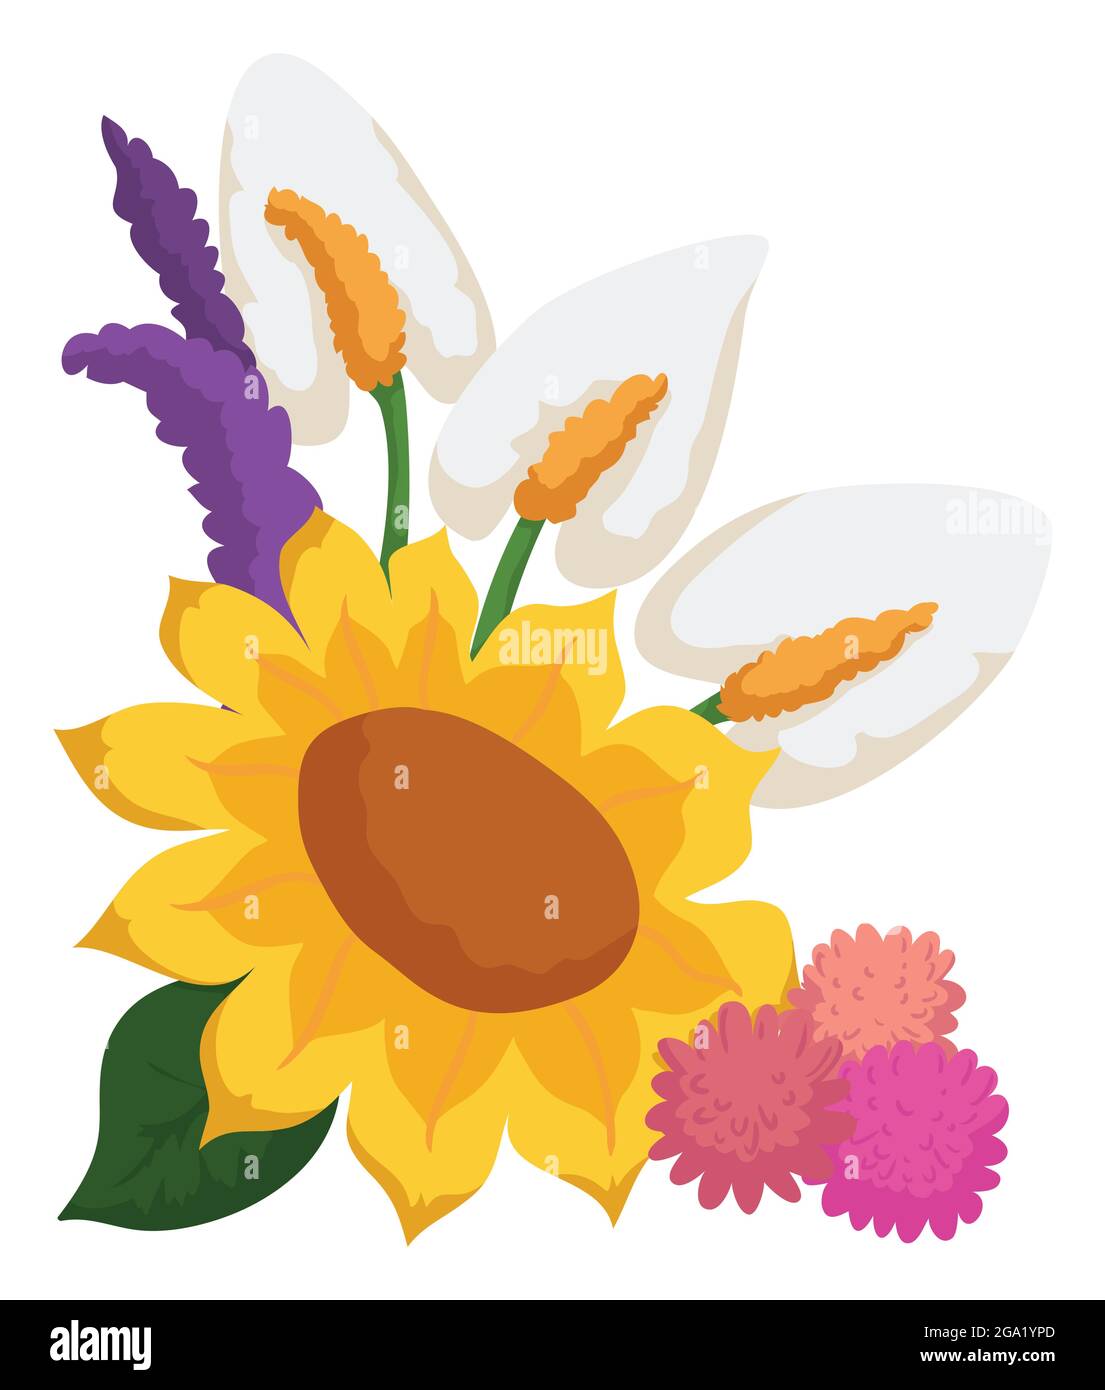 Beautiful floral arrangement made with colorful flowers: yellow sunflower, pink pompom dahlias, white anthuriums and purple lavenders. Stock Vector